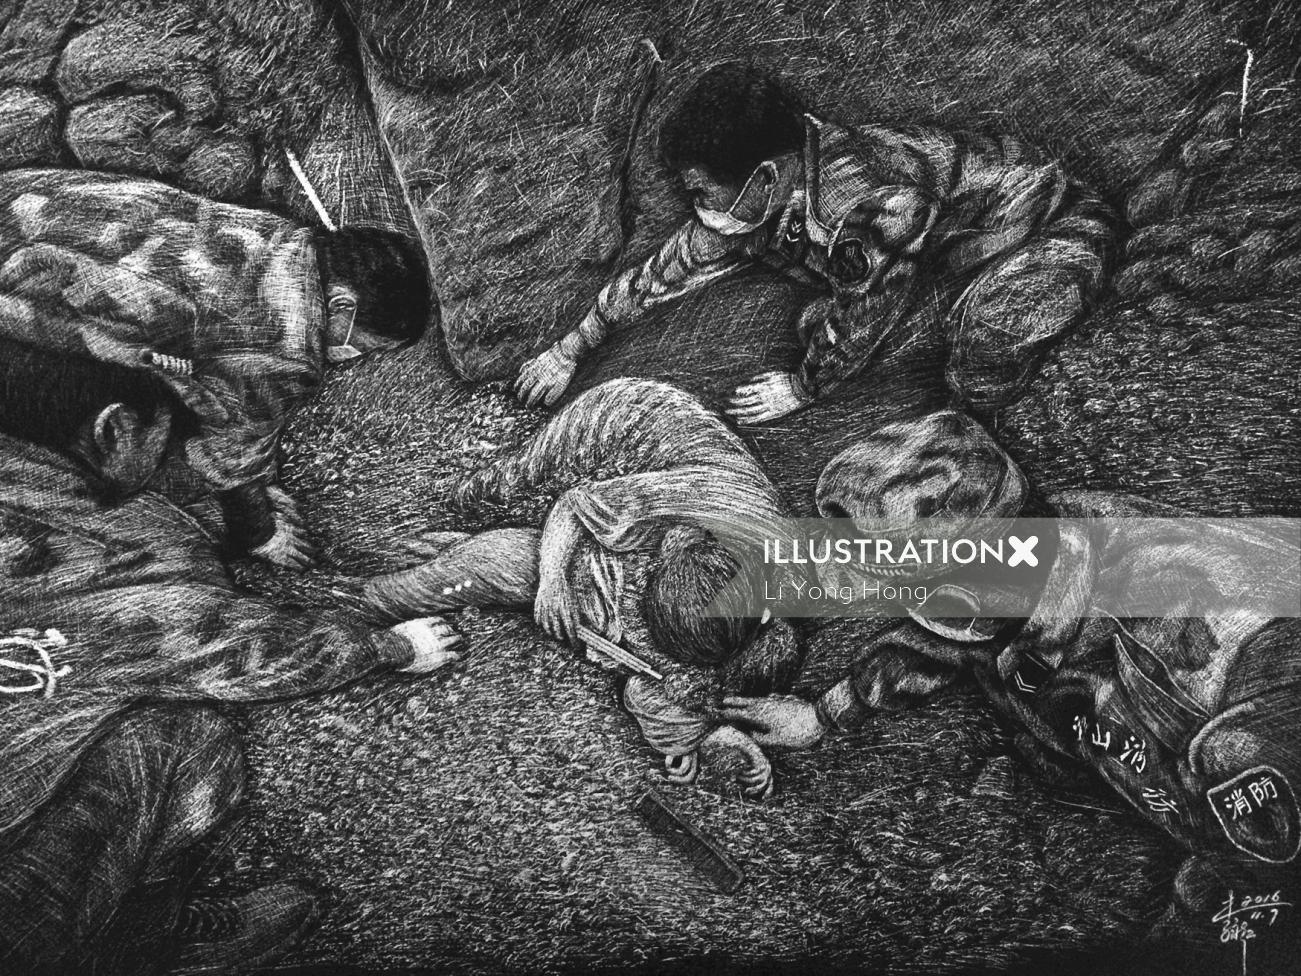 People illustration of soldiers helping